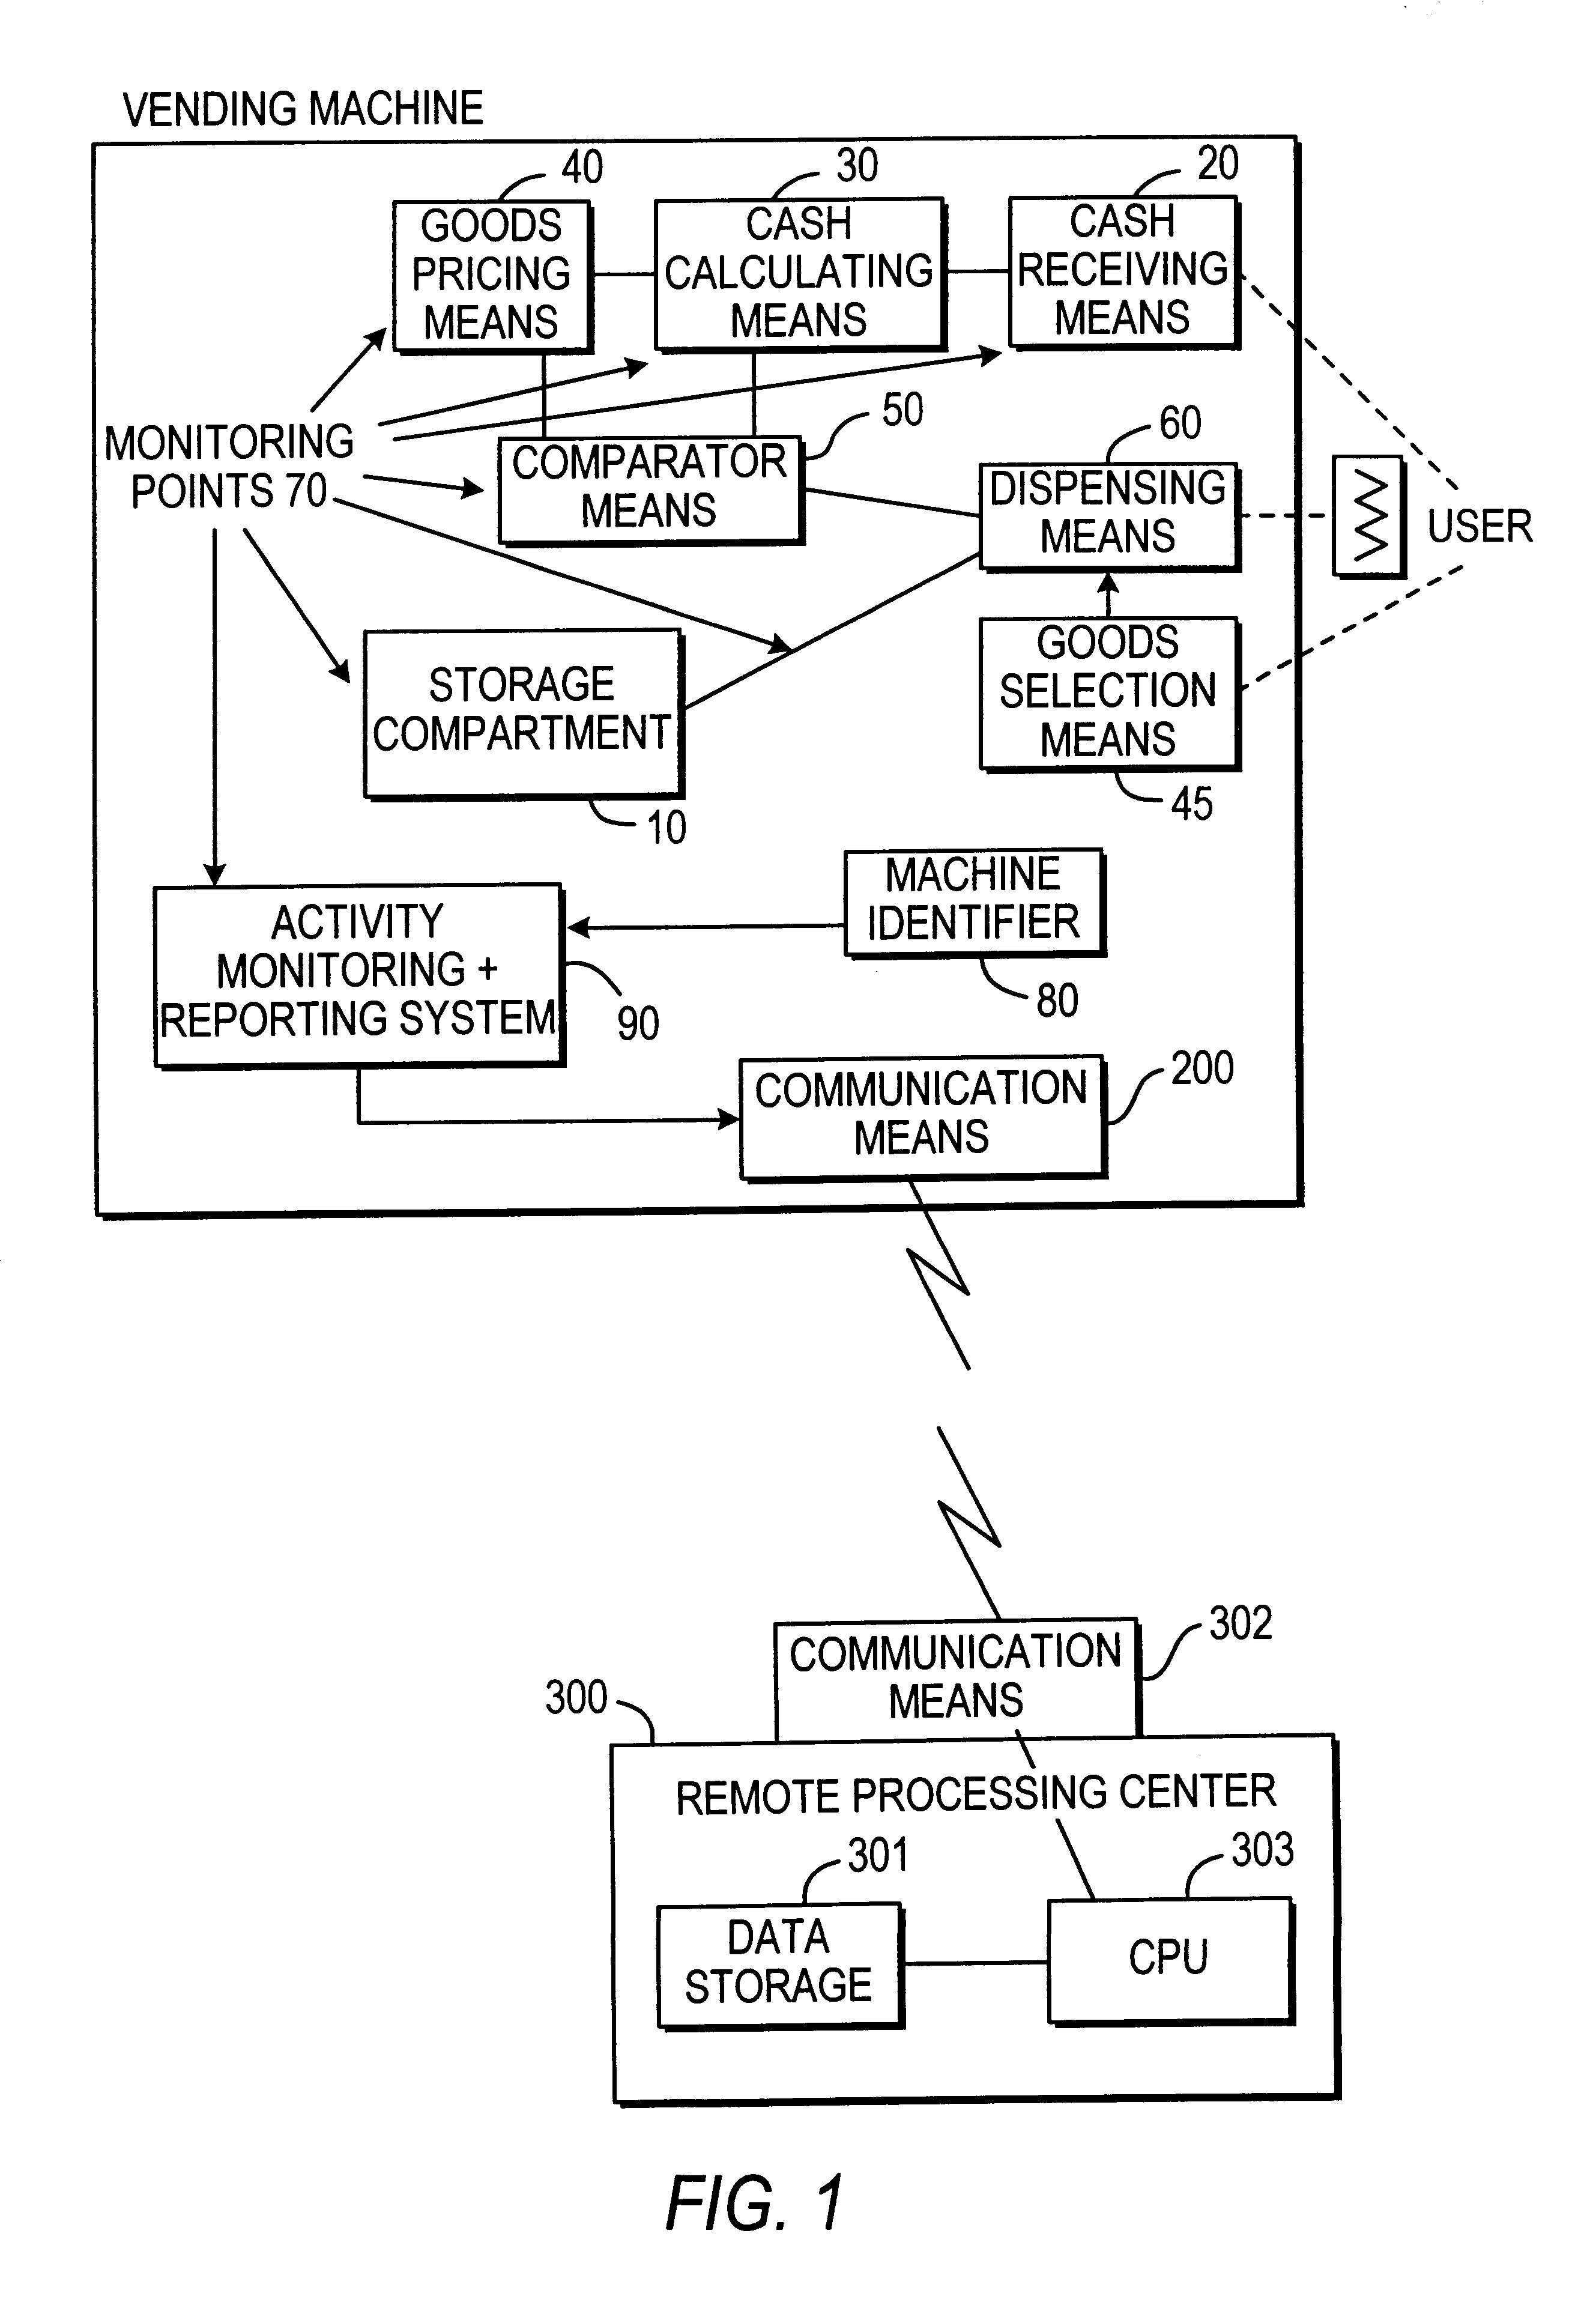 Apparatus and method for improved vending machine inventory maintenance